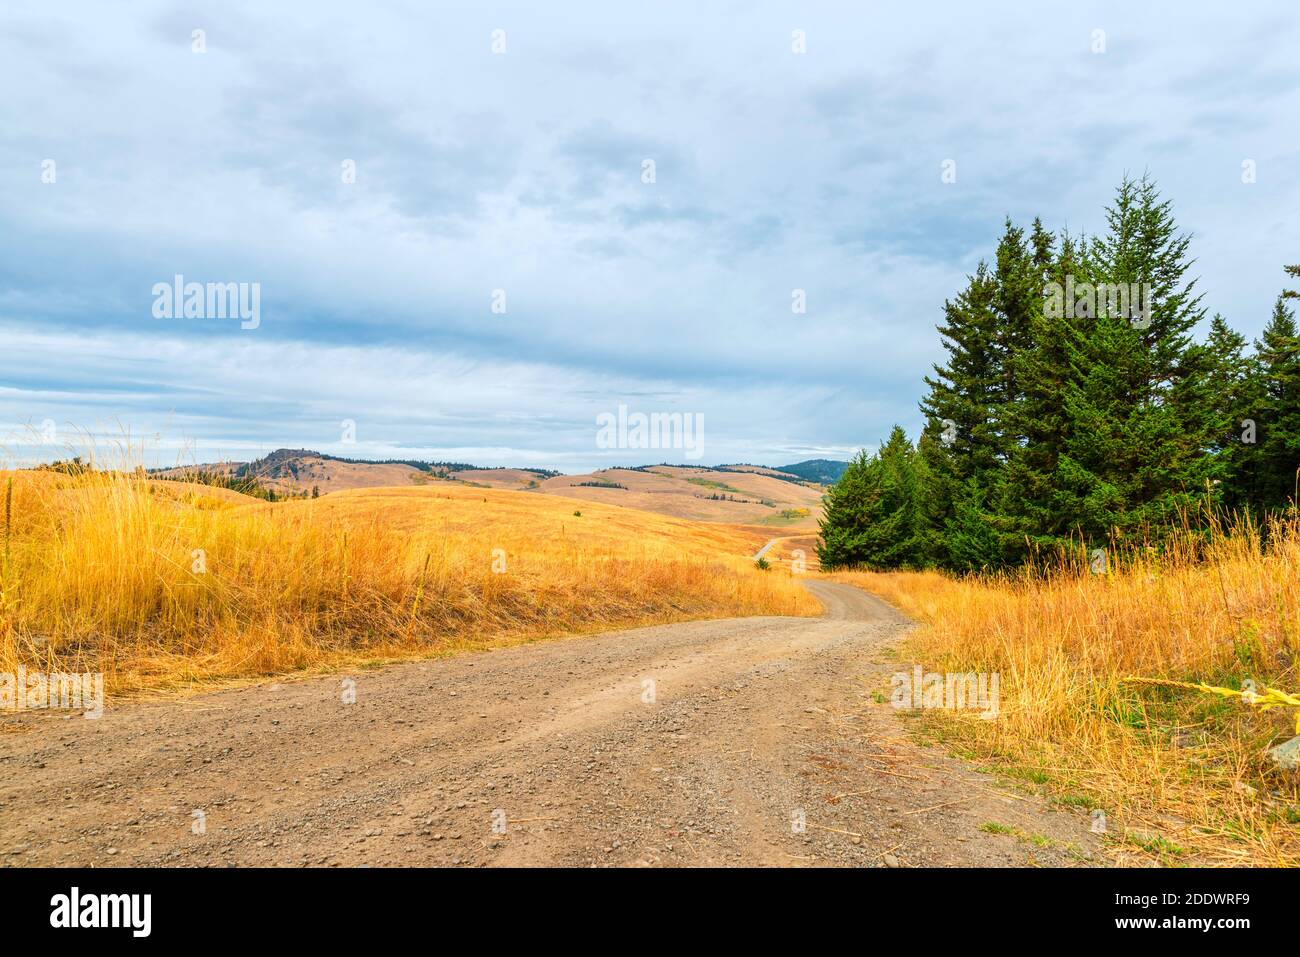 The country winding road leading into the distance to the hills. Tall, yellow grass along the sides of the road, green trees in the foreground, and fo Stock Photo